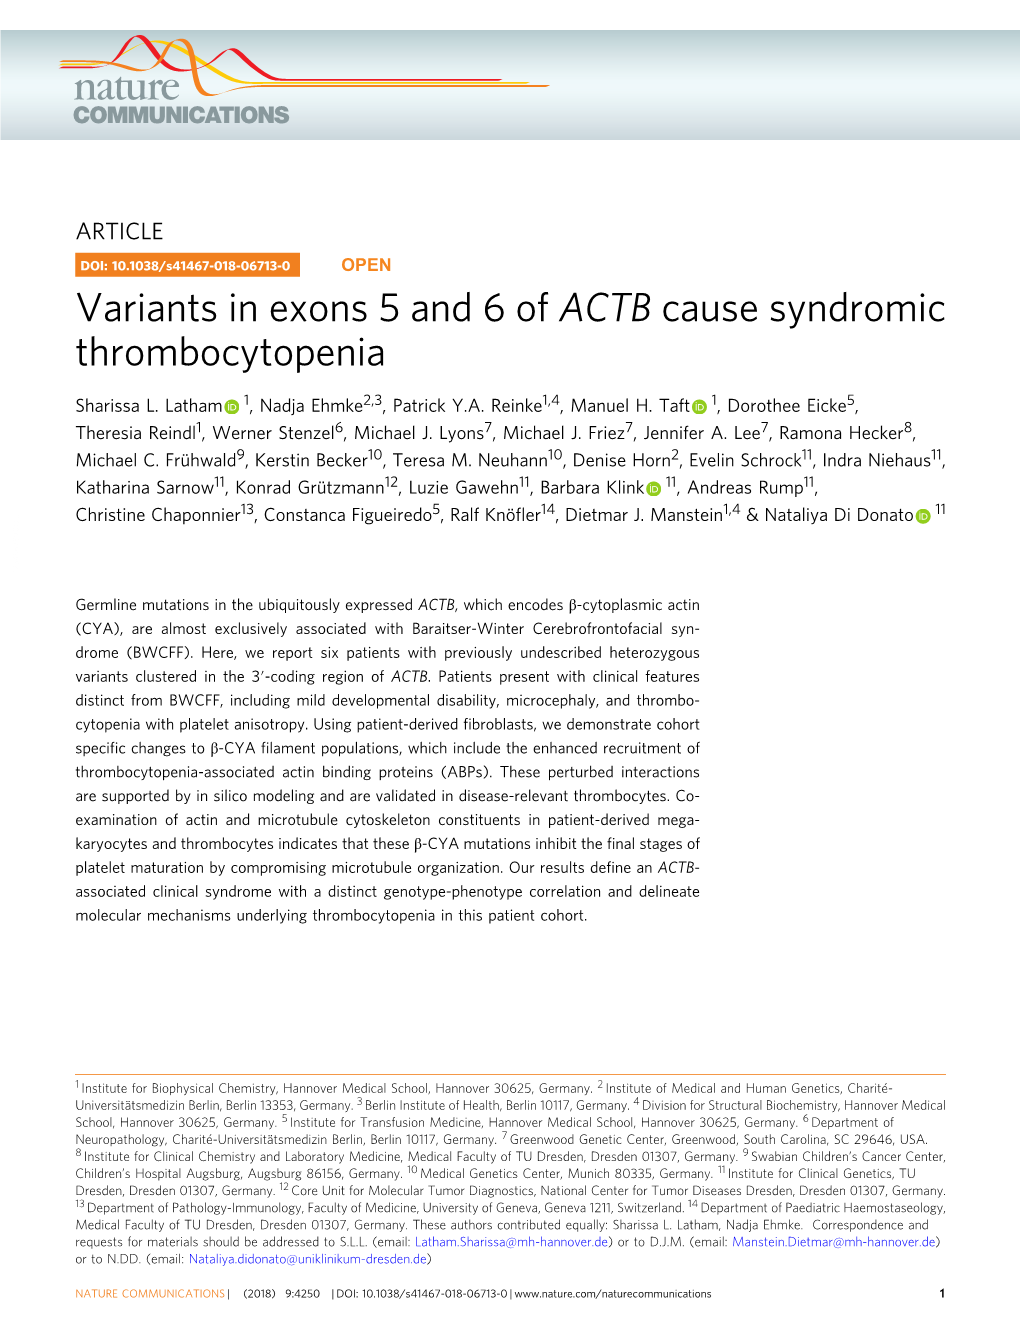 Variants in Exons 5 and 6 of ACTB Cause Syndromic Thrombocytopenia